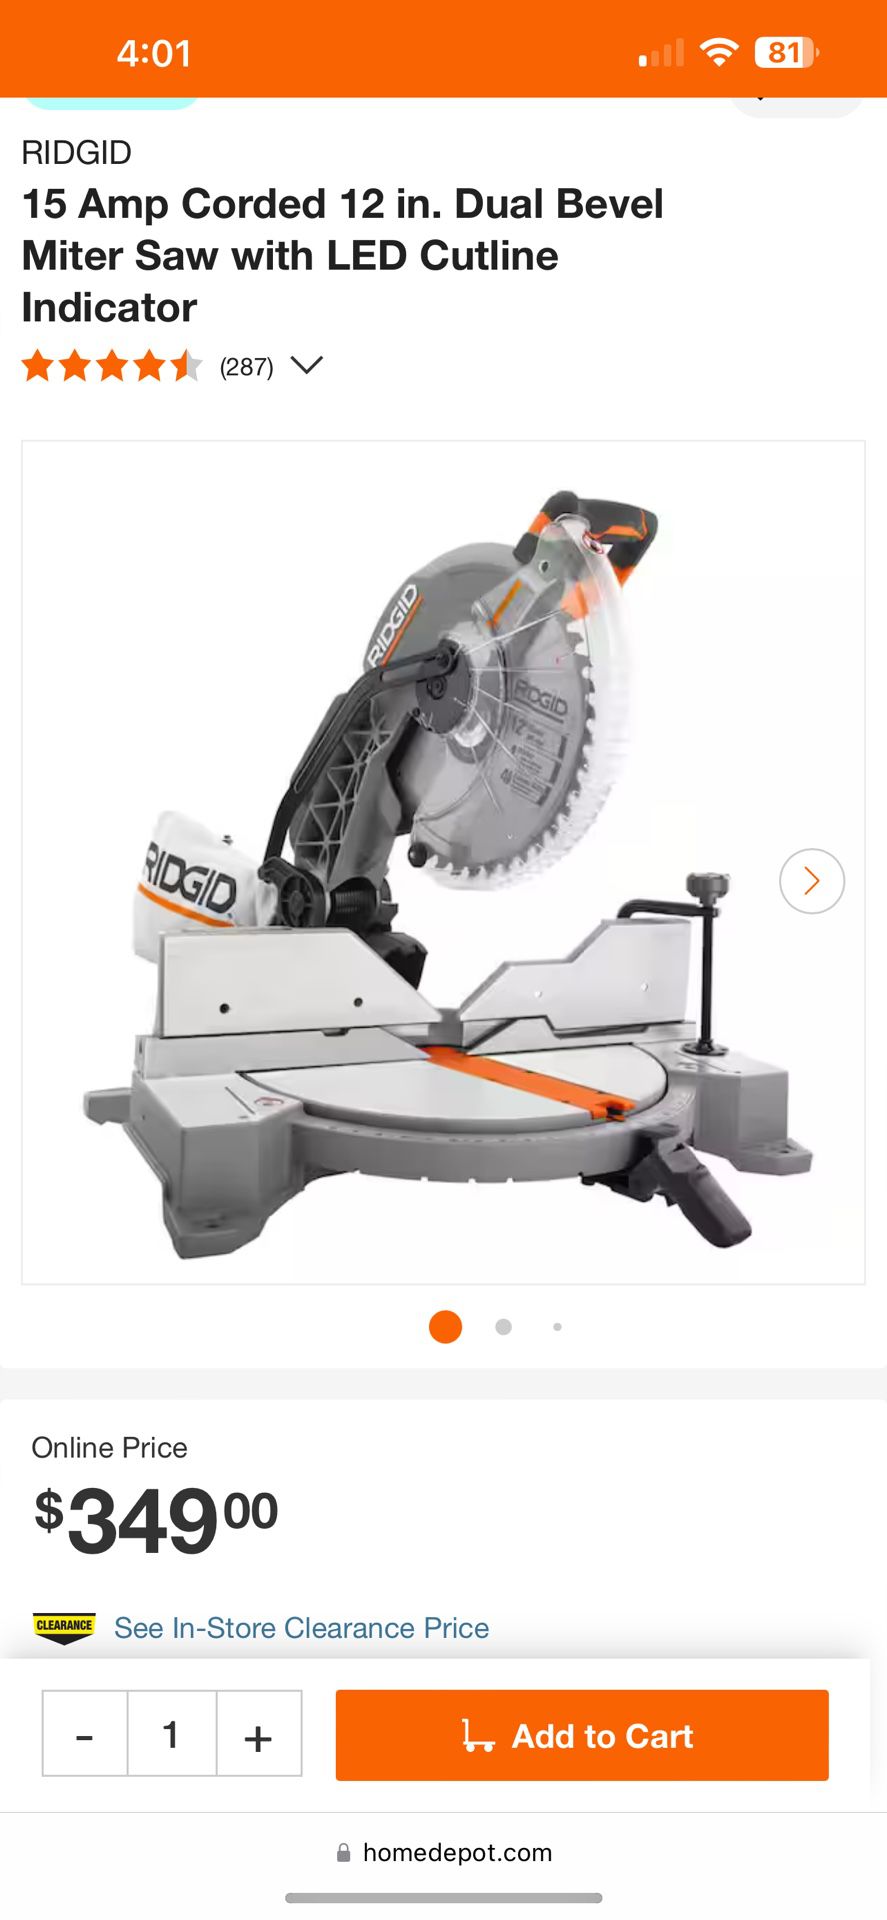 12 in. Dual Bevel Miter Saw with LED Cutline Indicator